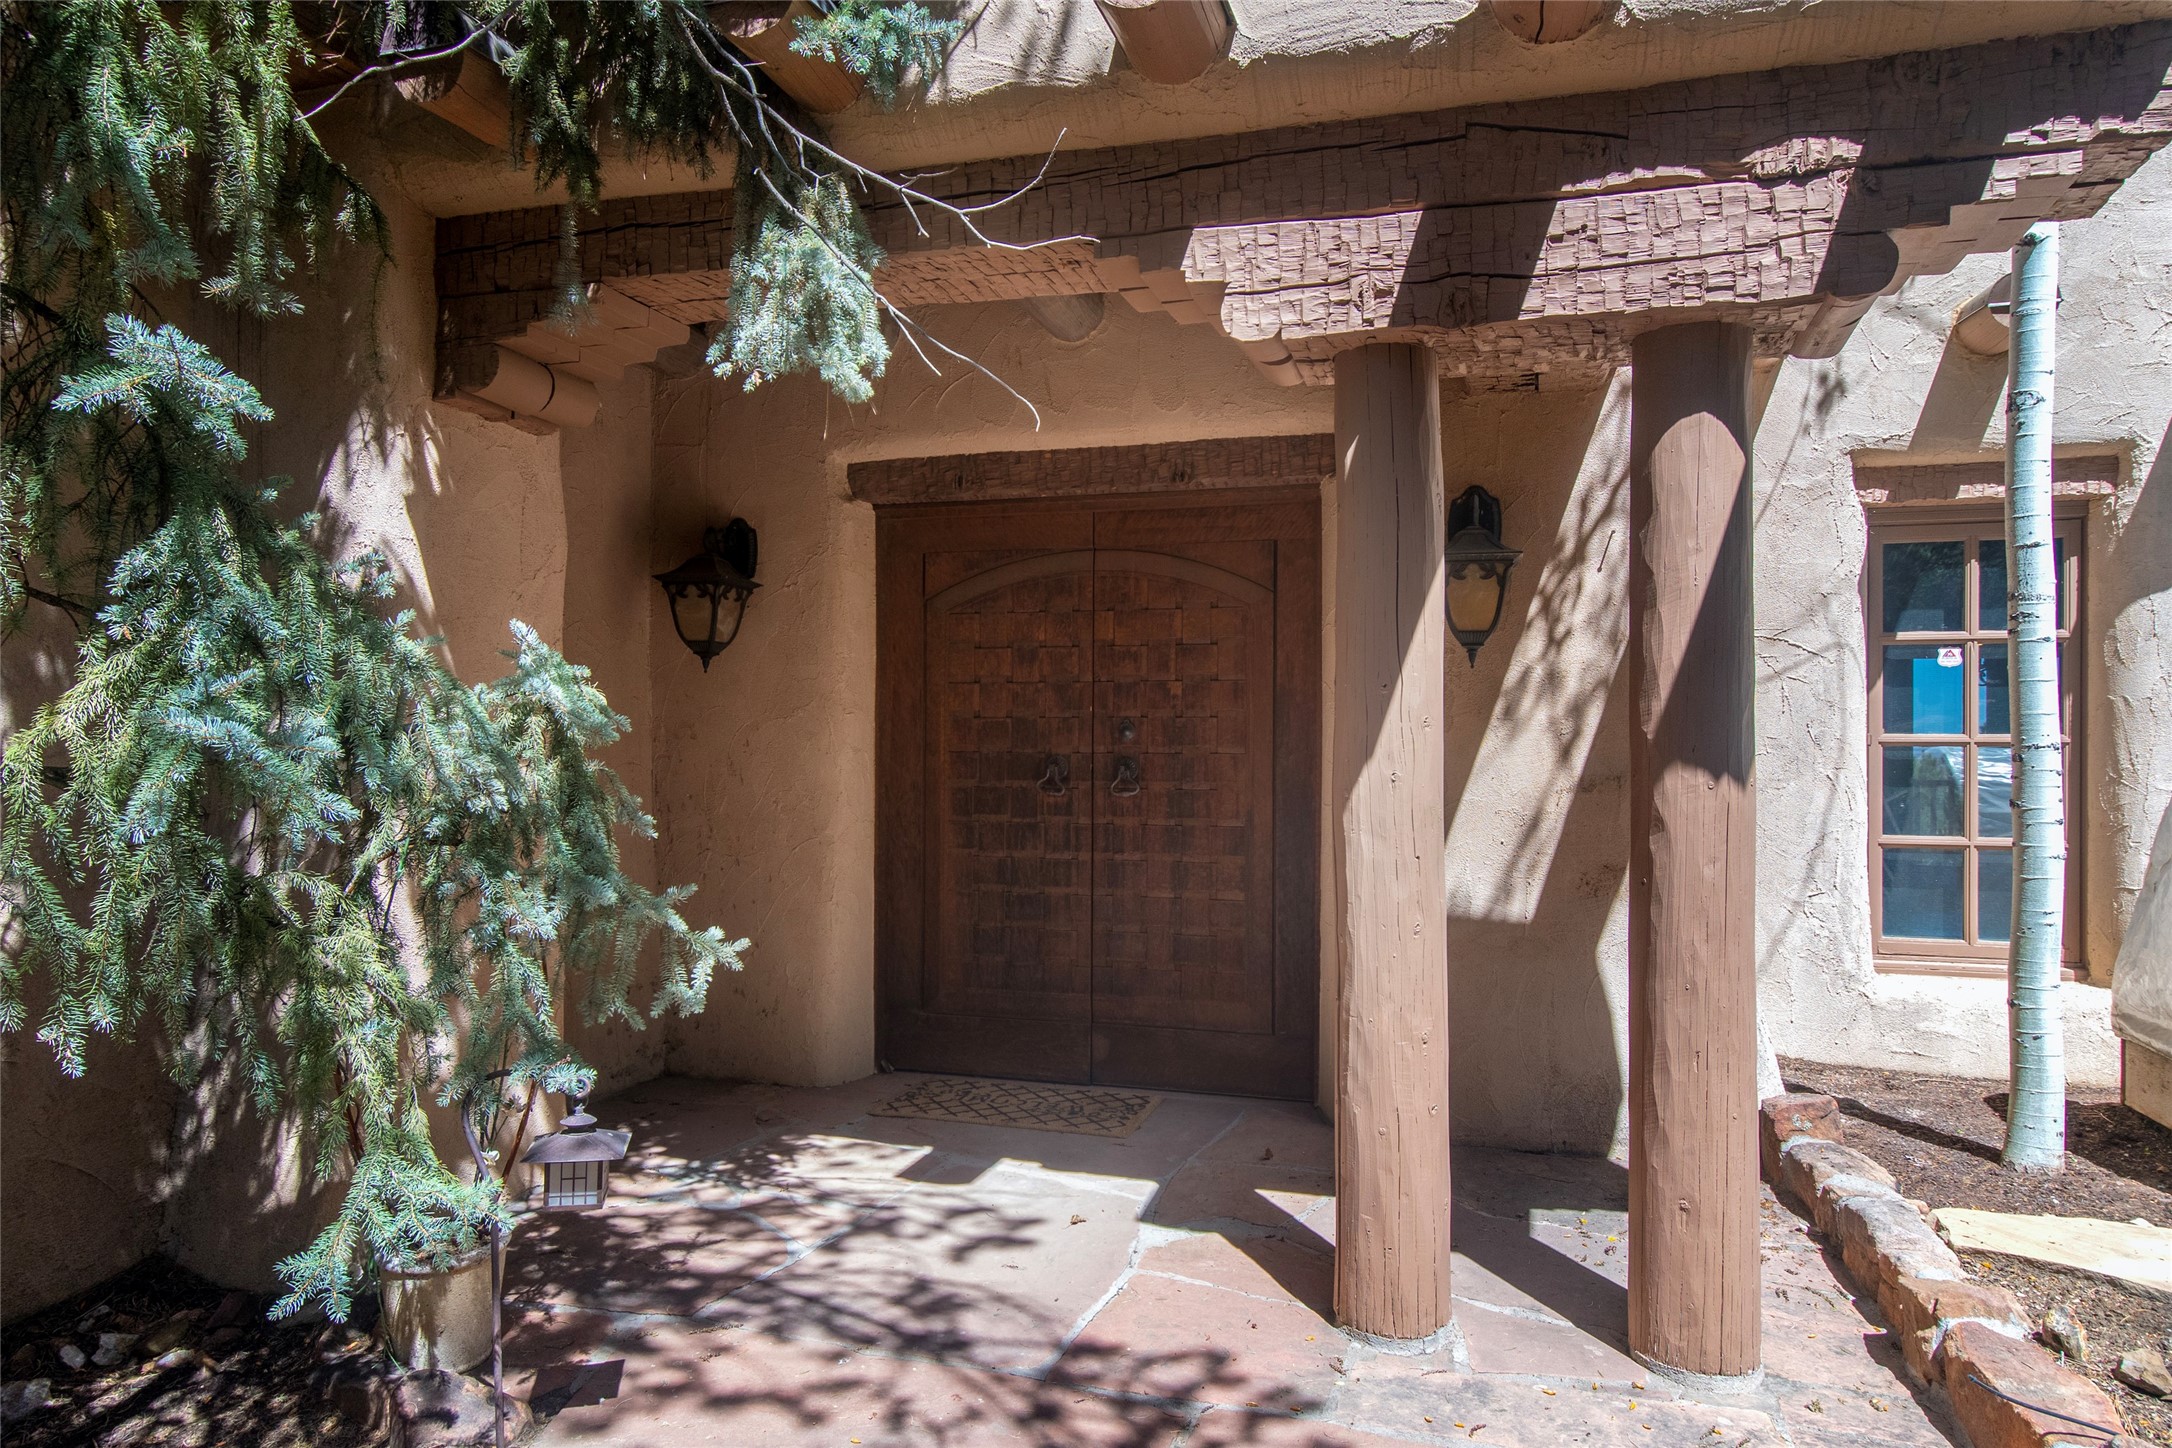 200 Brownell Howland Road, Santa Fe, New Mexico 87501, 3 Bedrooms Bedrooms, ,6 BathroomsBathrooms,Residential,For Sale,200 Brownell Howland Road,202234361